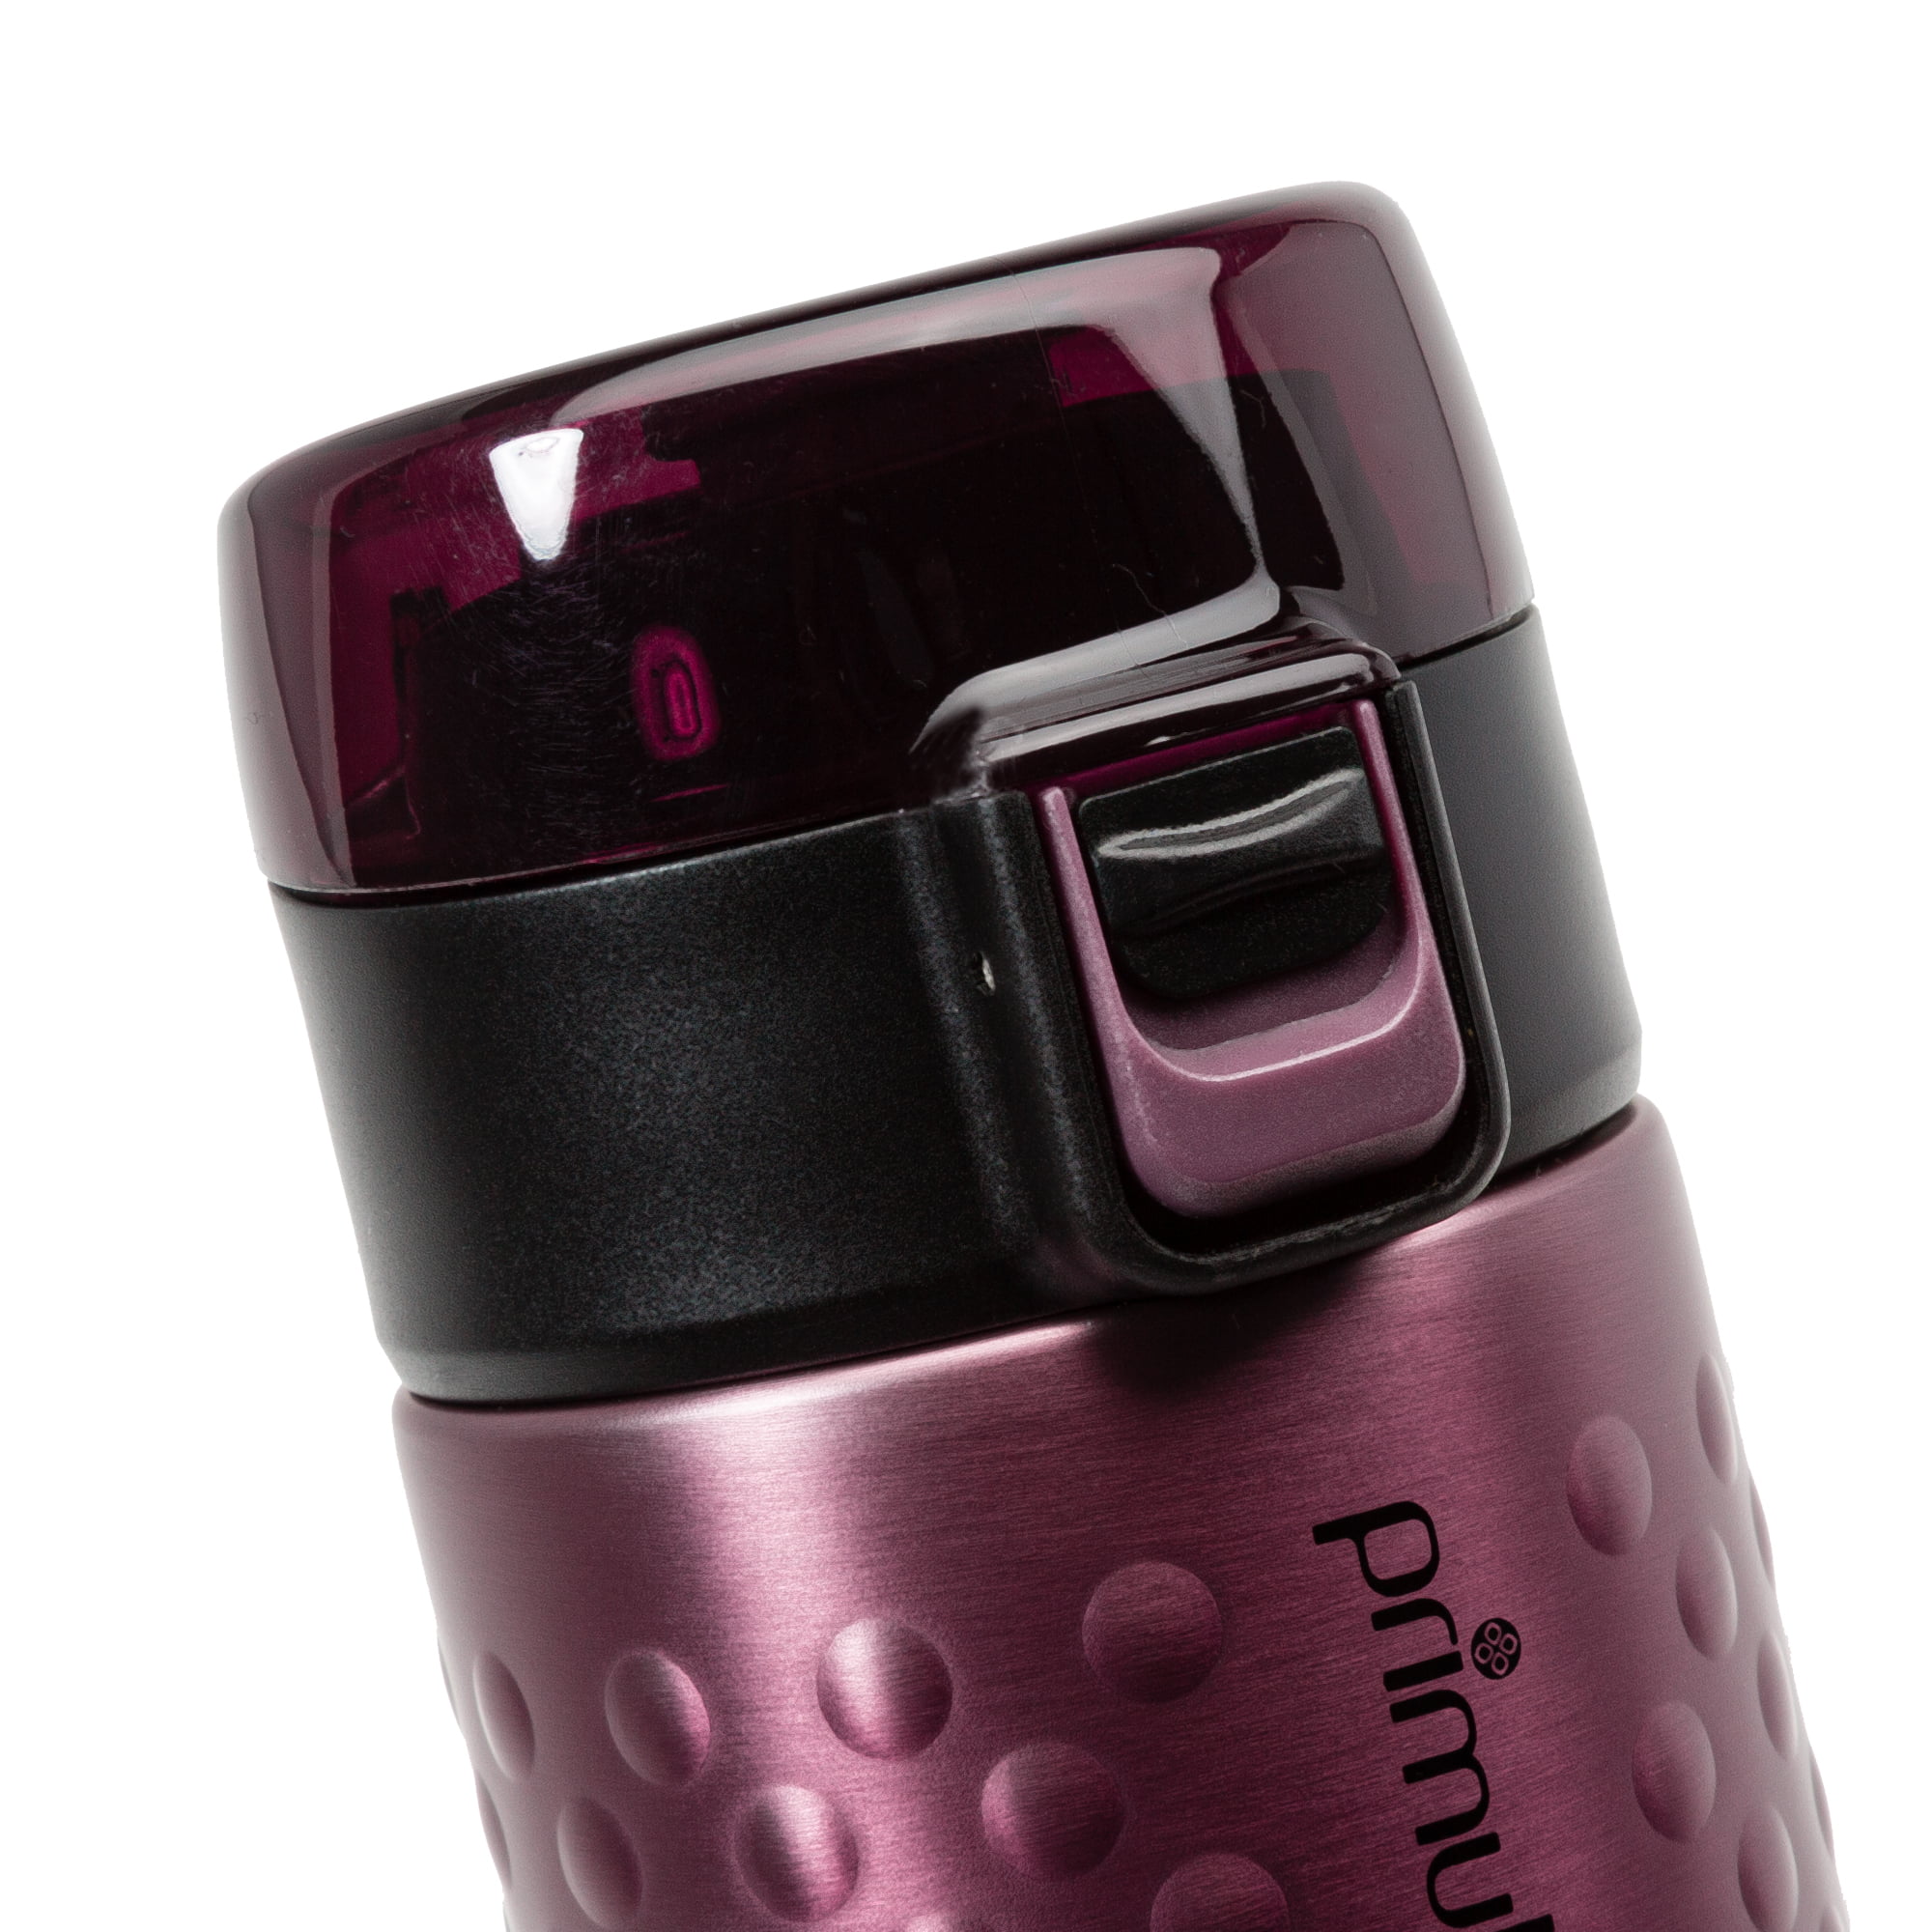 Primula 40-oz Insulated Stainless Steel Tumblerw/ Handle ,Purple